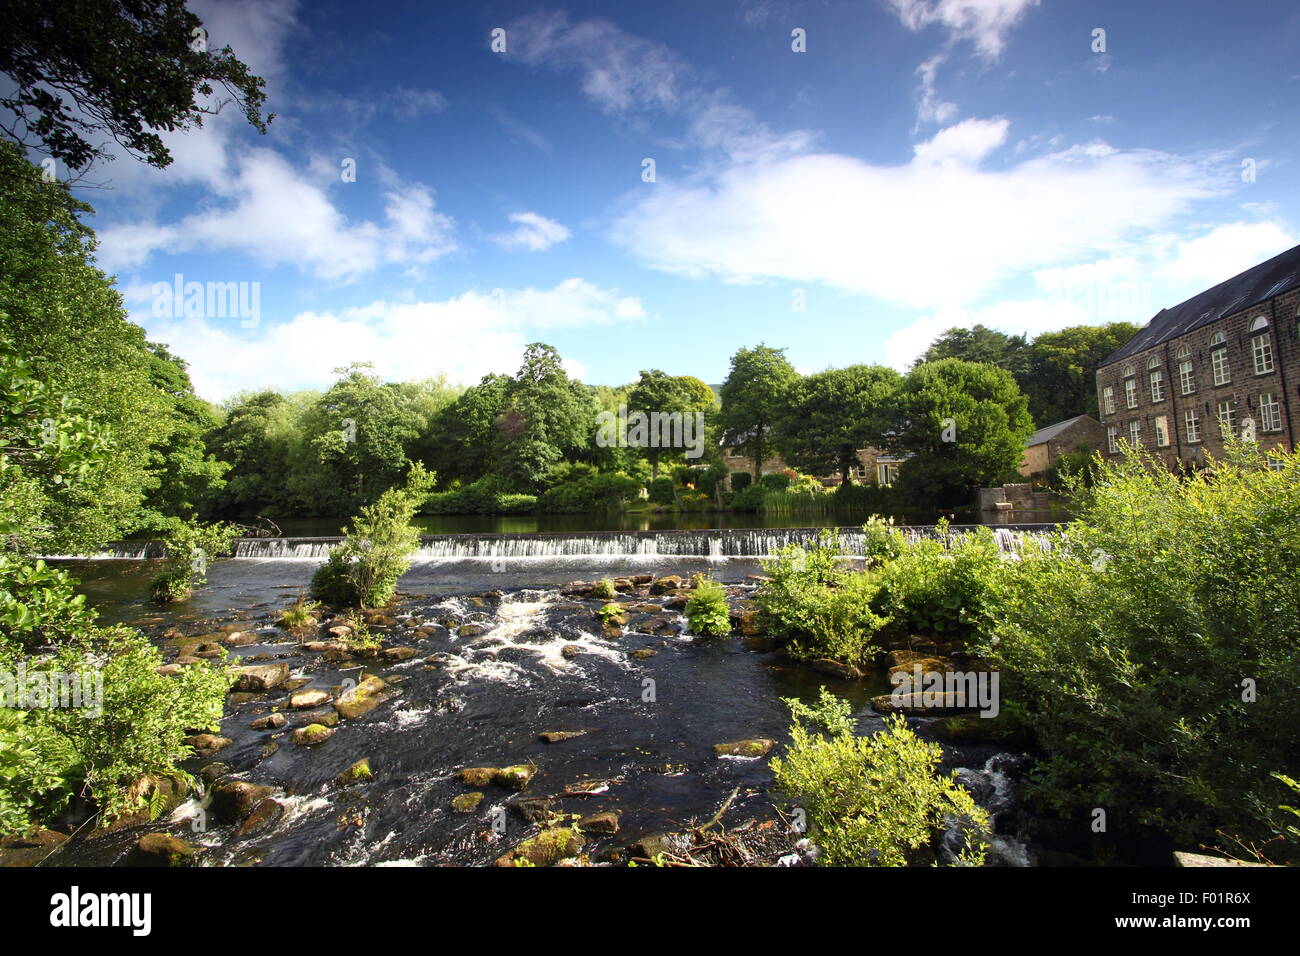 Bamford Mill and weir on the River Derwent in the Peak District National Park, England, UK Stock Photo